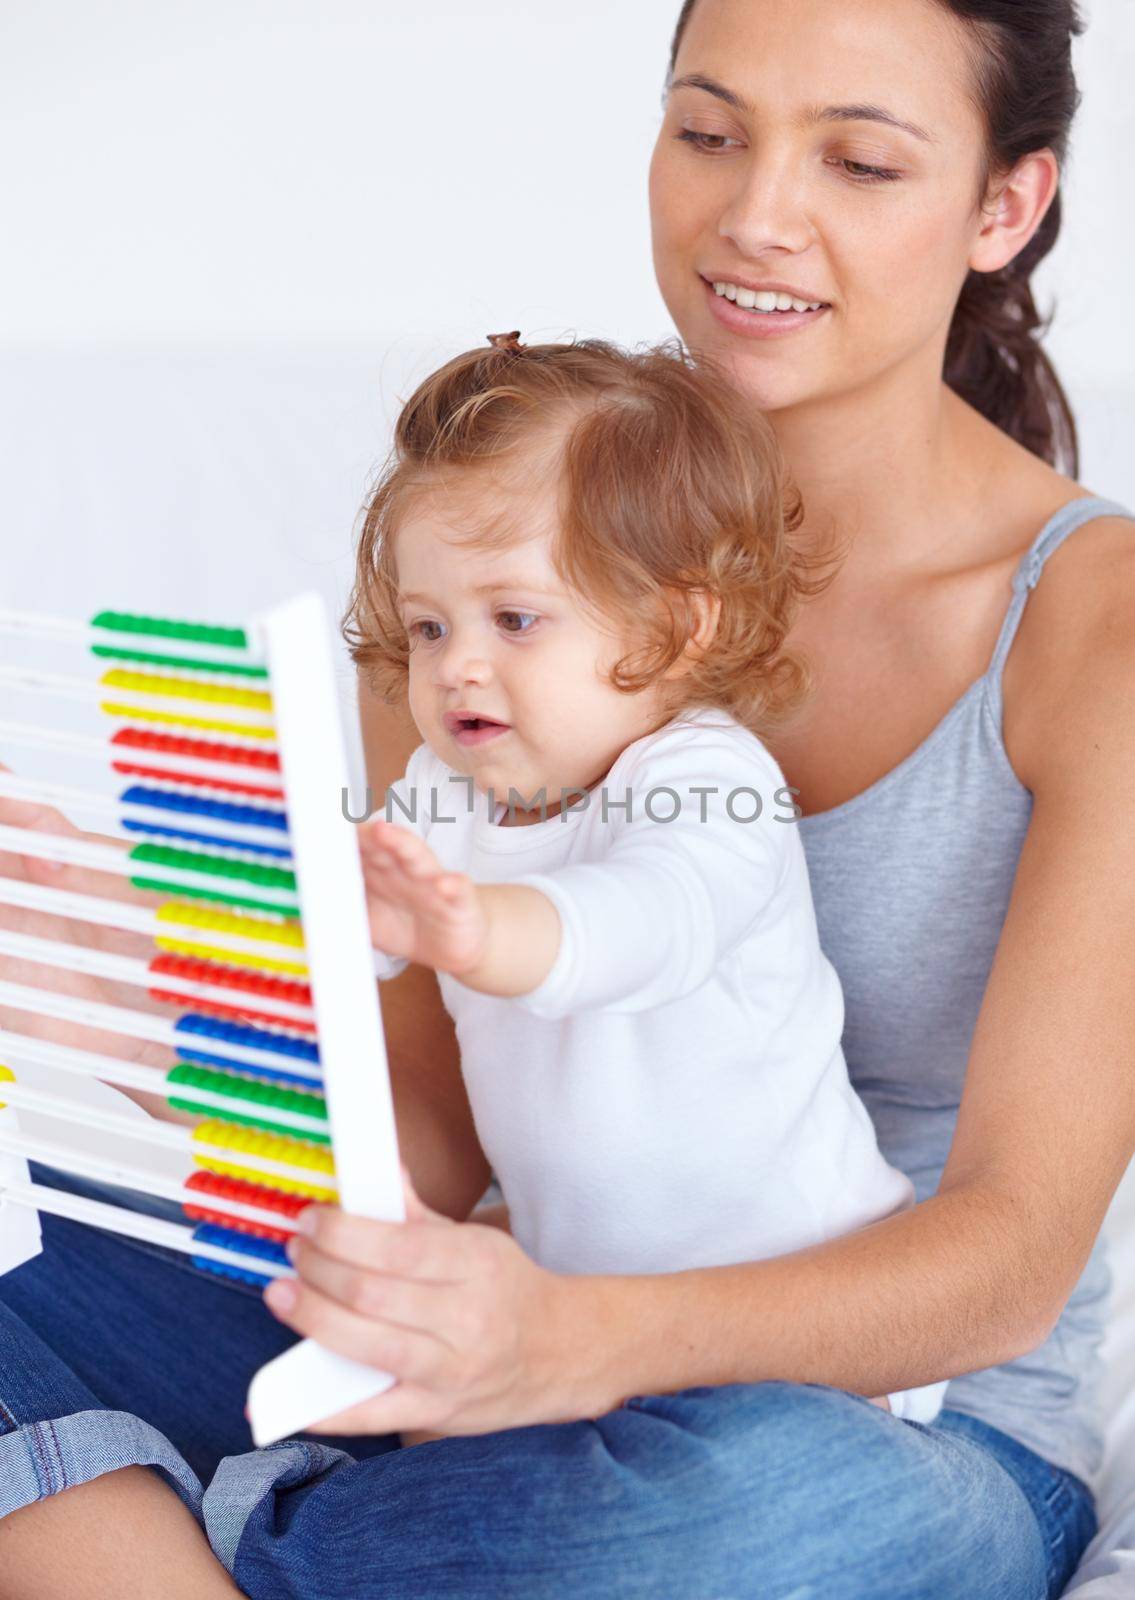 Learning at home. A young mother teaching her baby daughter the basics of mathematics by using an abacus